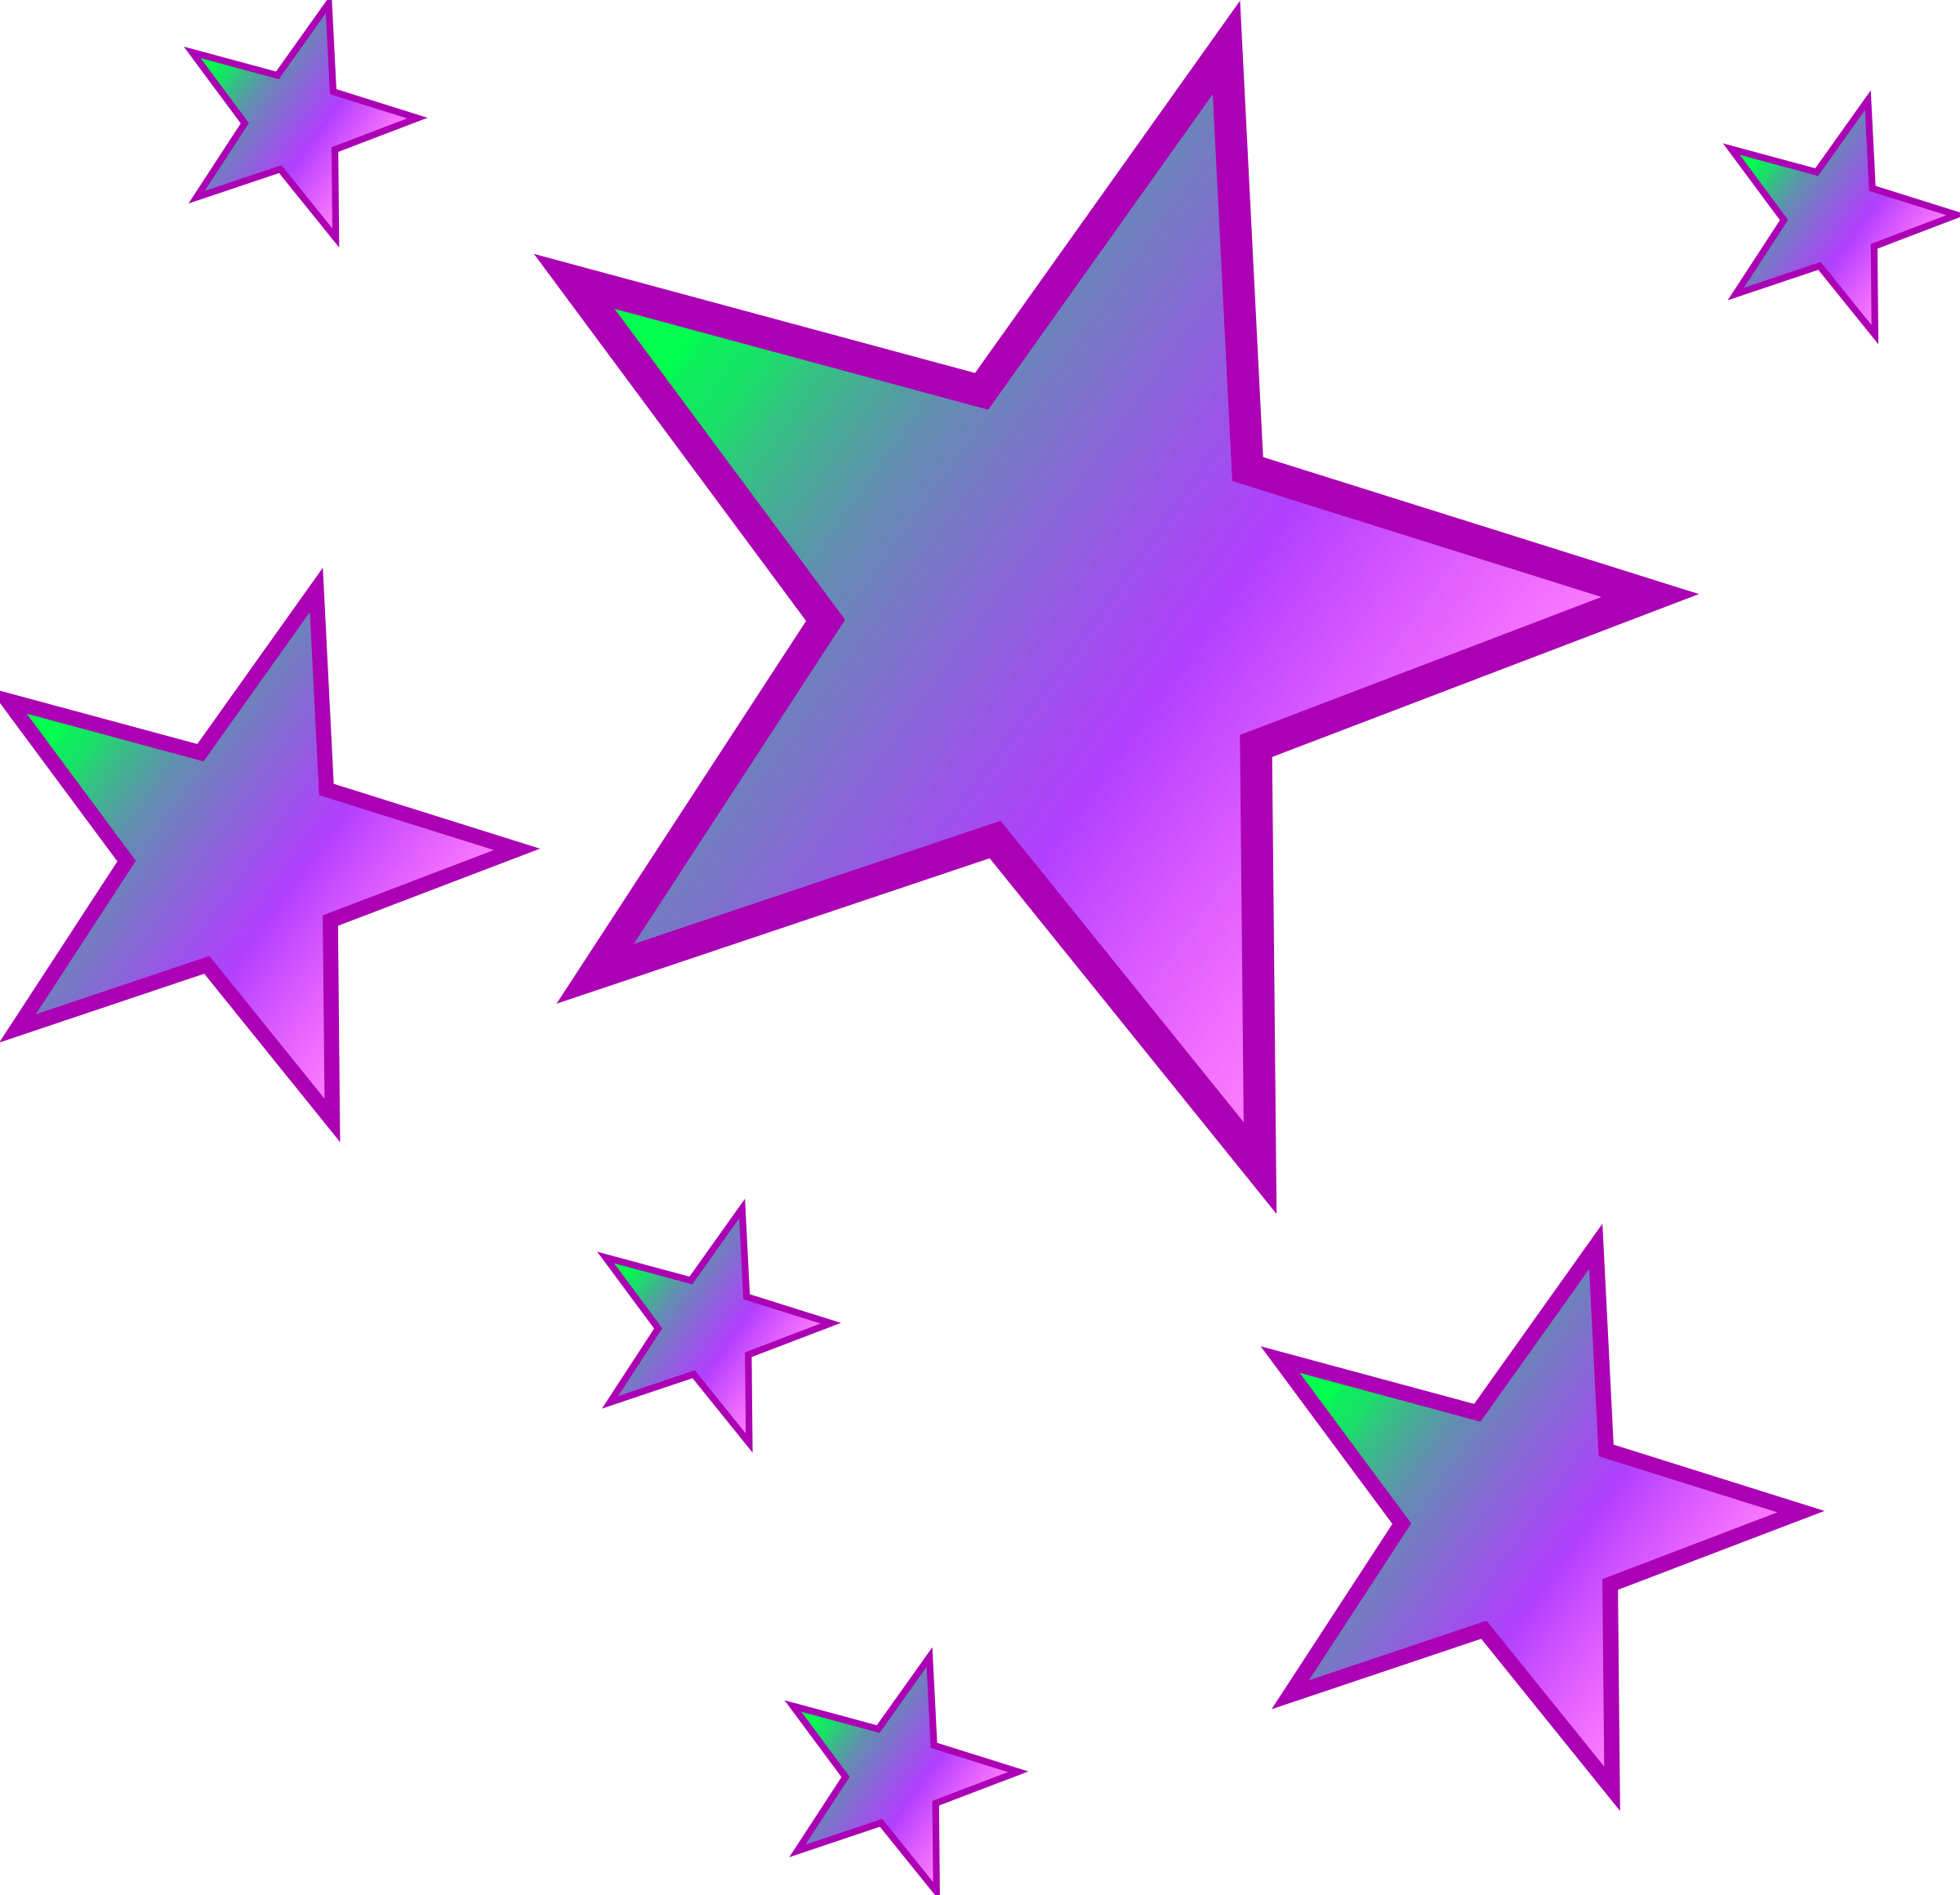 Gold Star Star Clipart And - Decorative Arts (2400x2320)